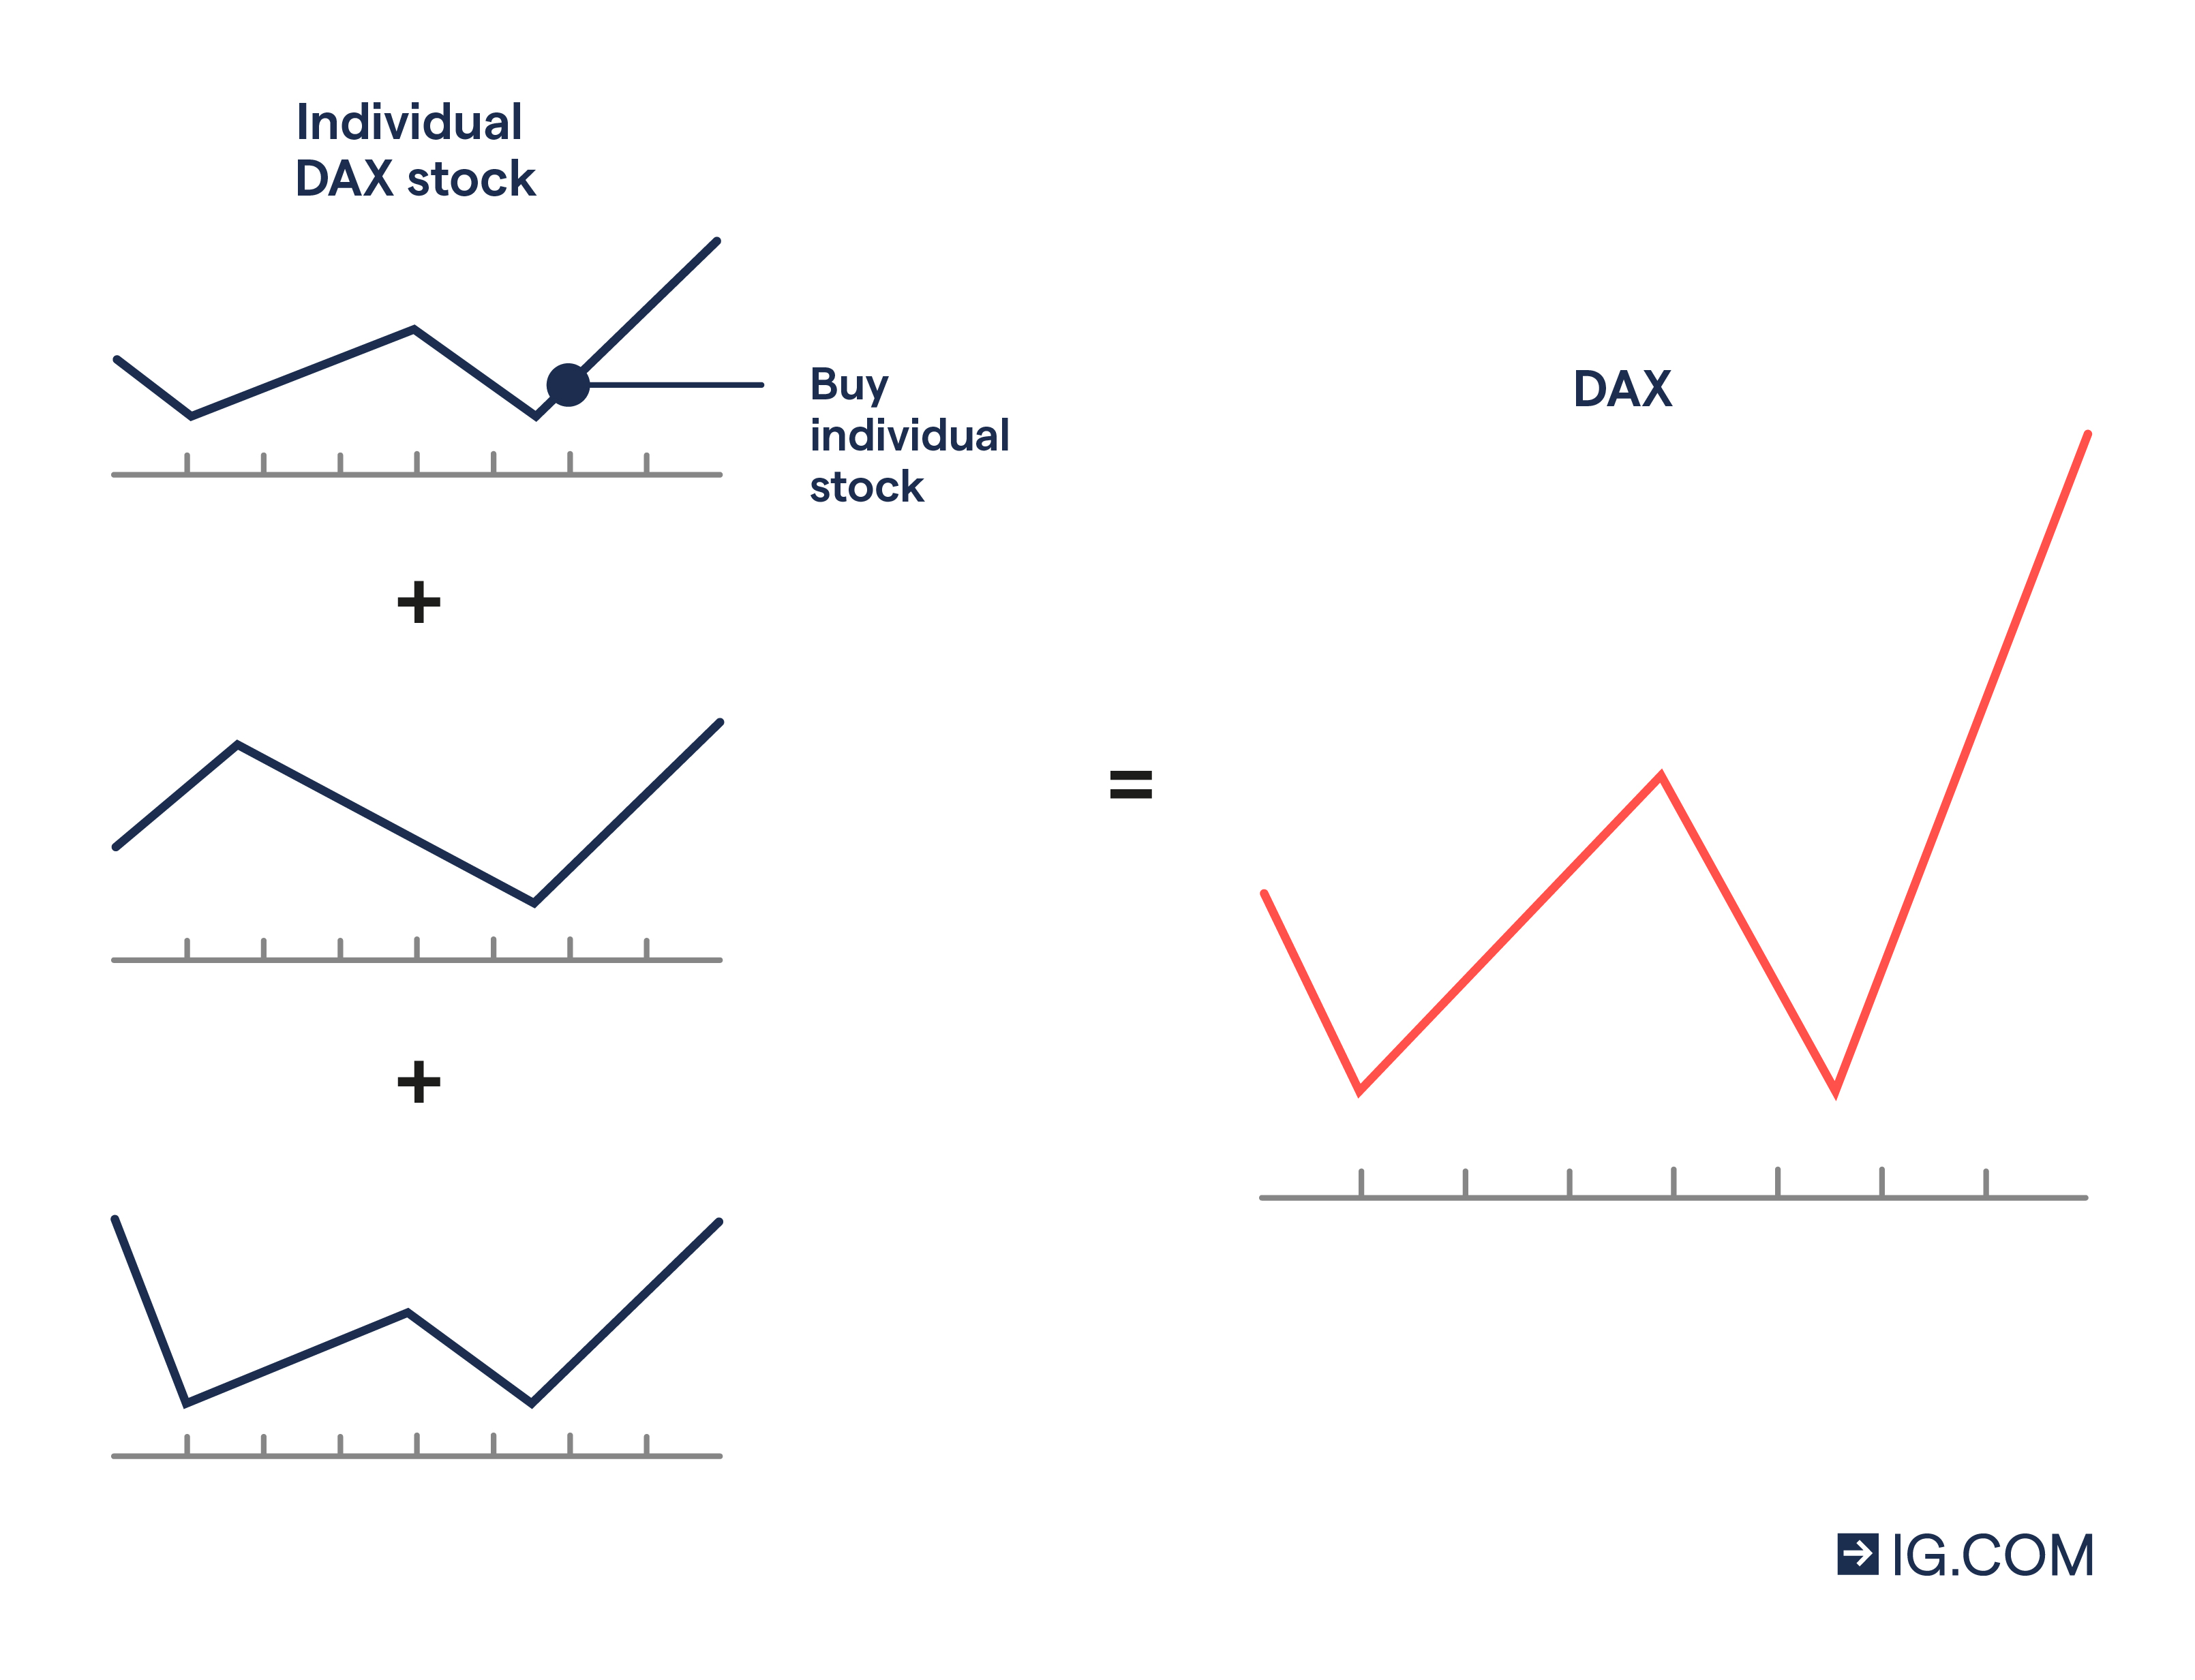 Individual DAX stocks making up the DAX index